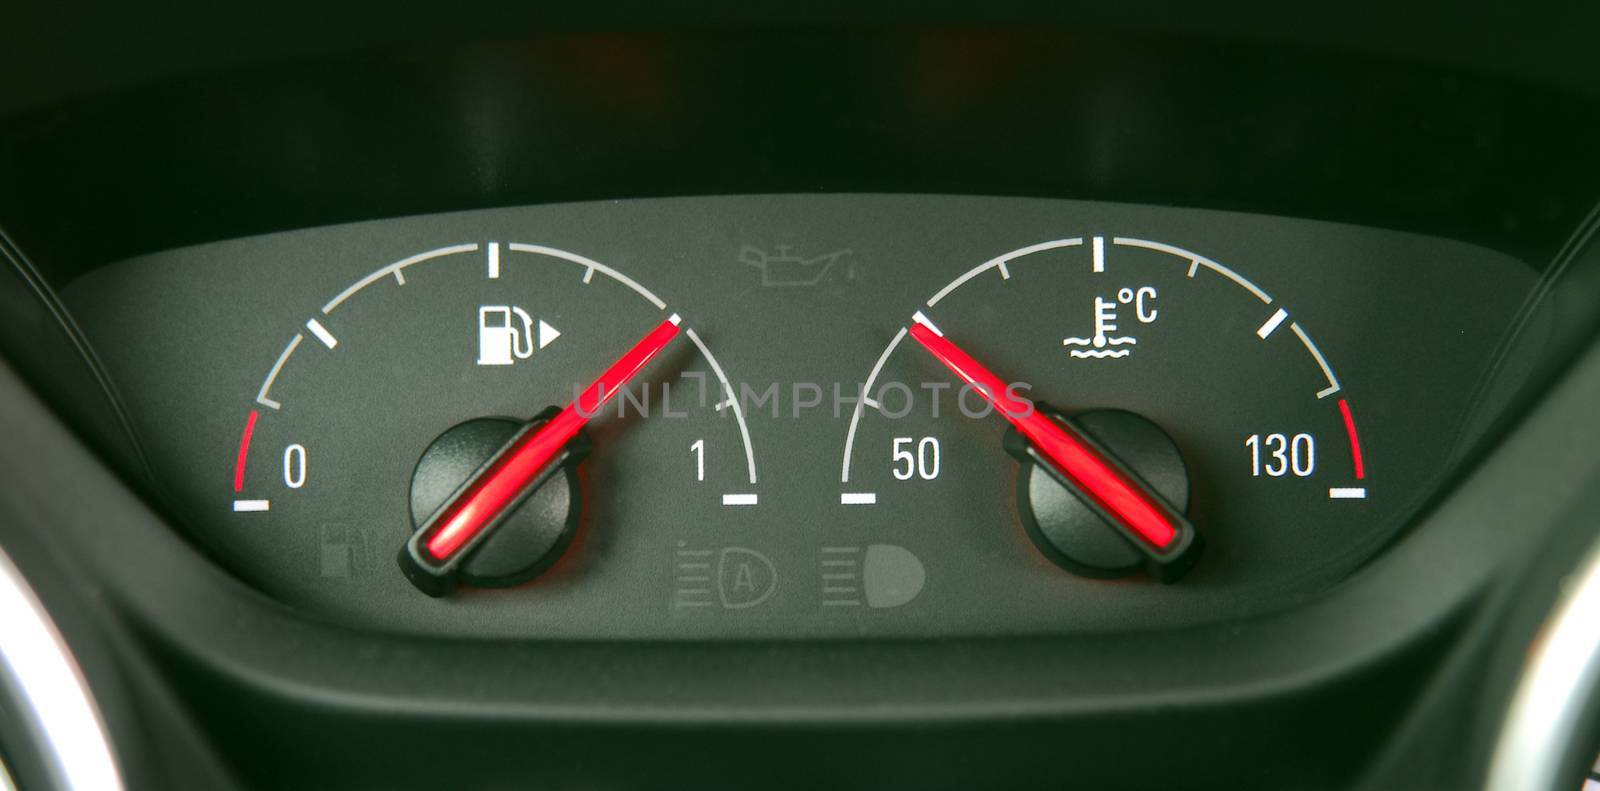 analog instruments for the amount of fuel and the temperature in the car